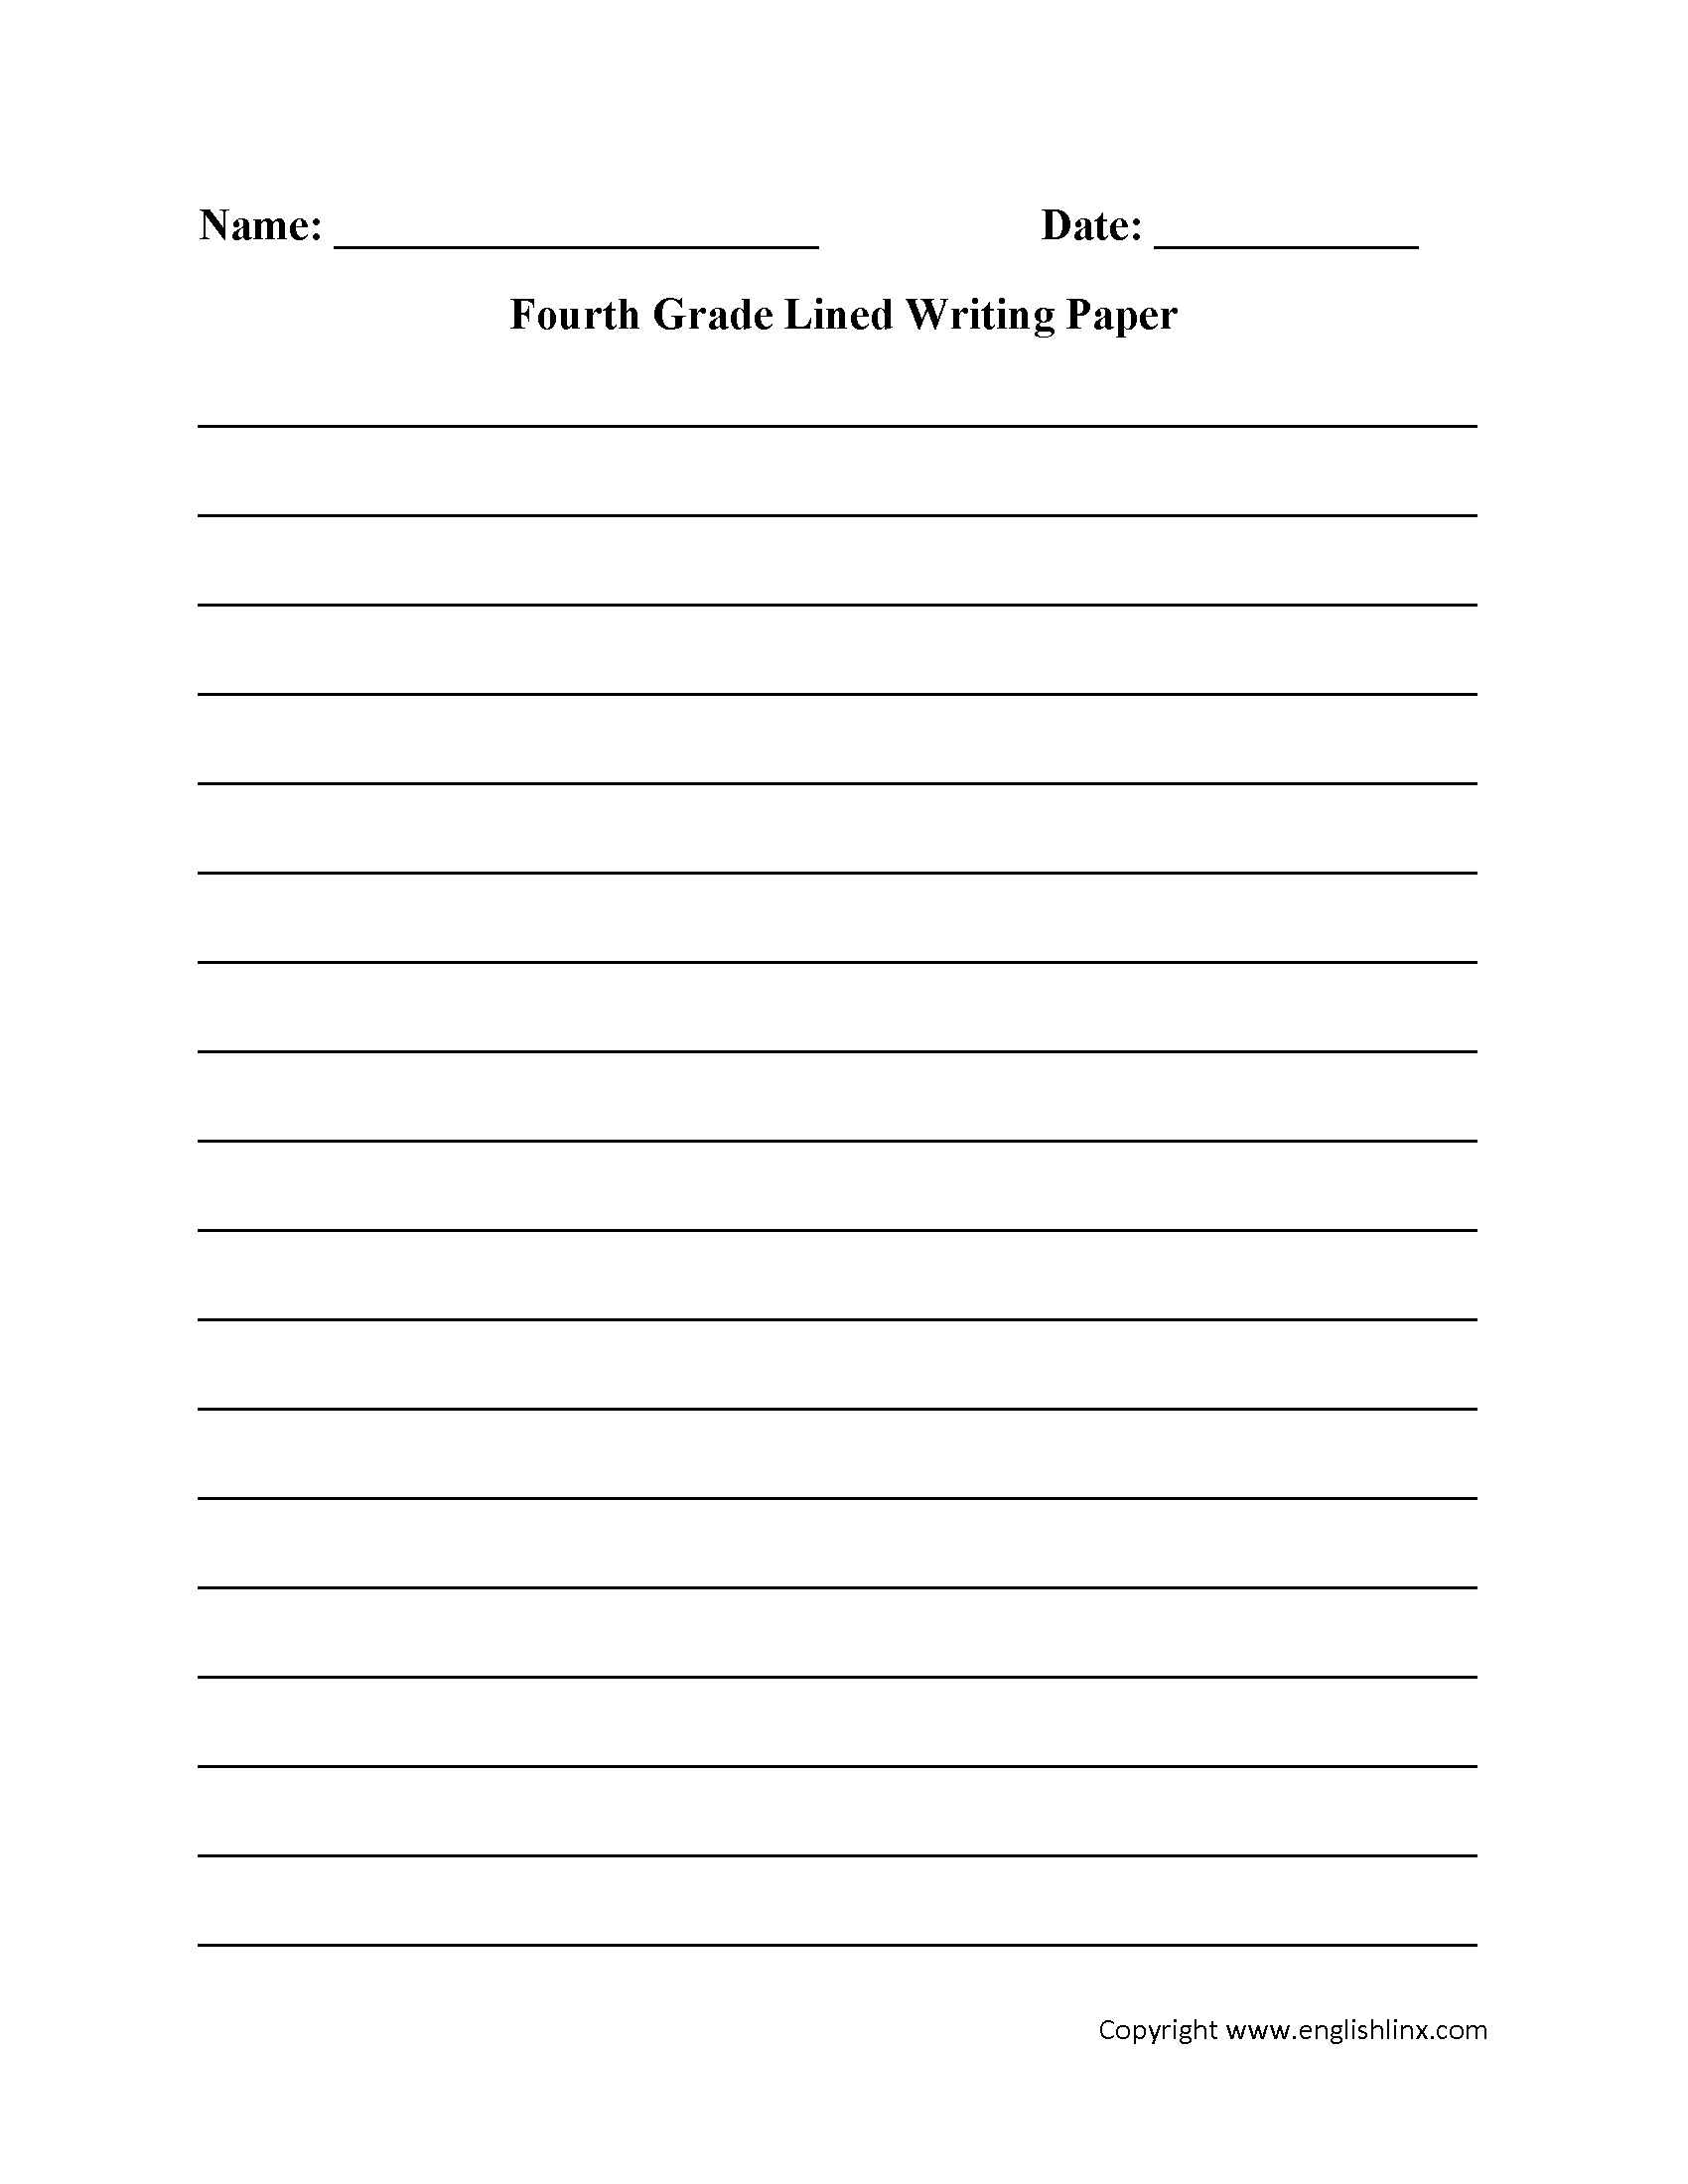 Fourth Grade Lined Writing Paper Cursive Handwriting Worksheets 